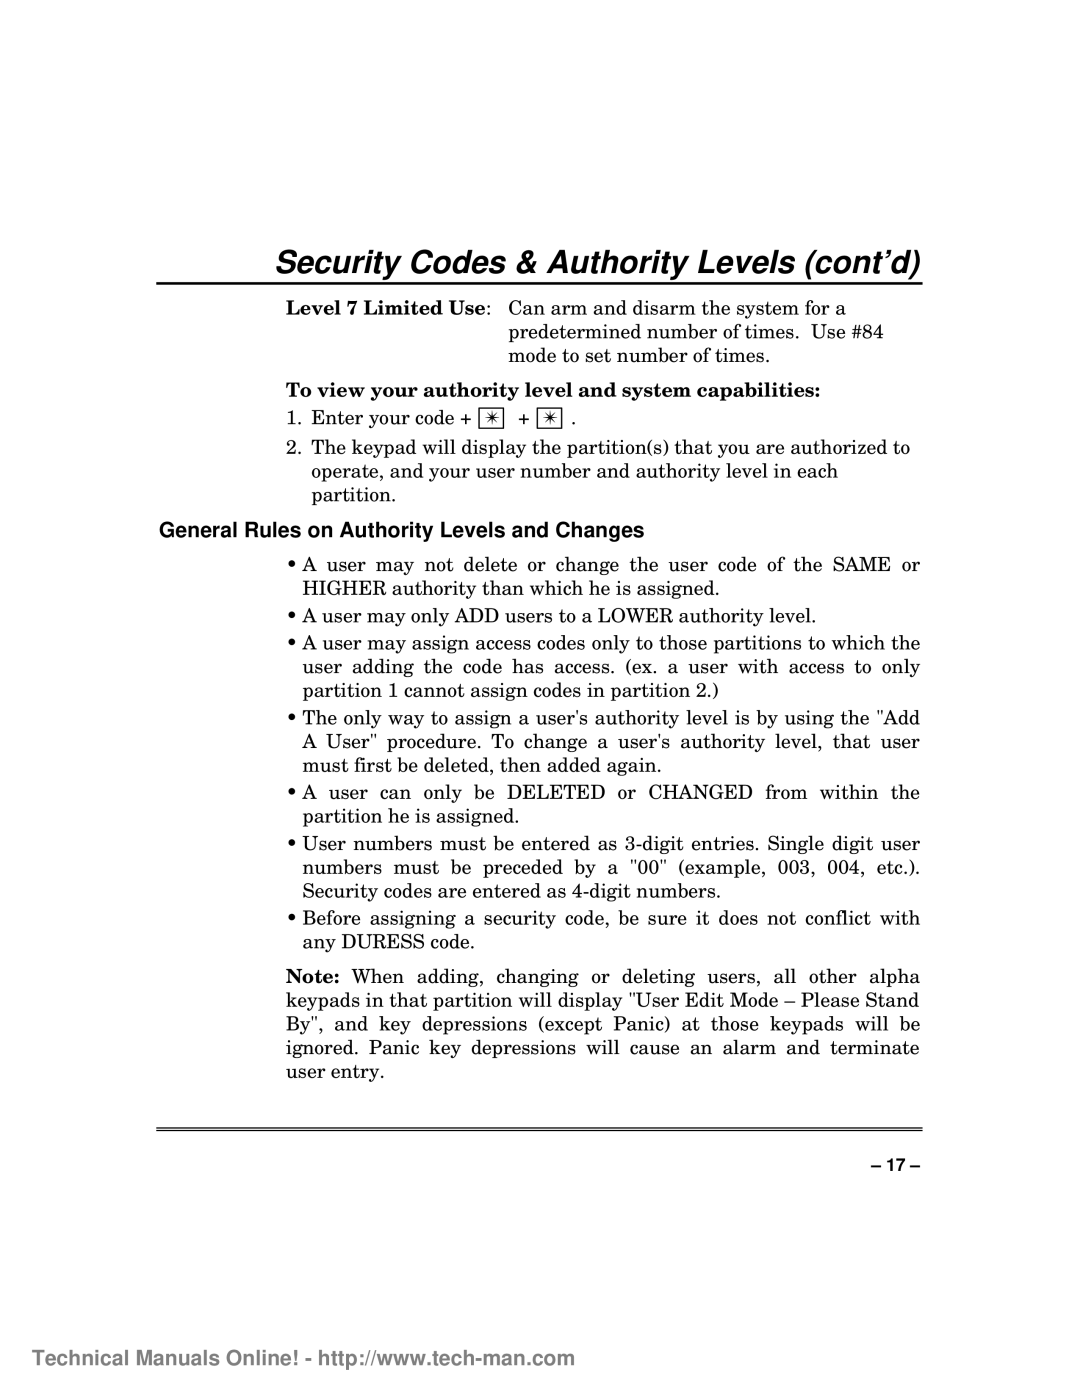 First Alert FA1600C/CA/CB, fa1600c General Rules on Authority Levels and Changes, Security Codes & Authority Levels cont’d 